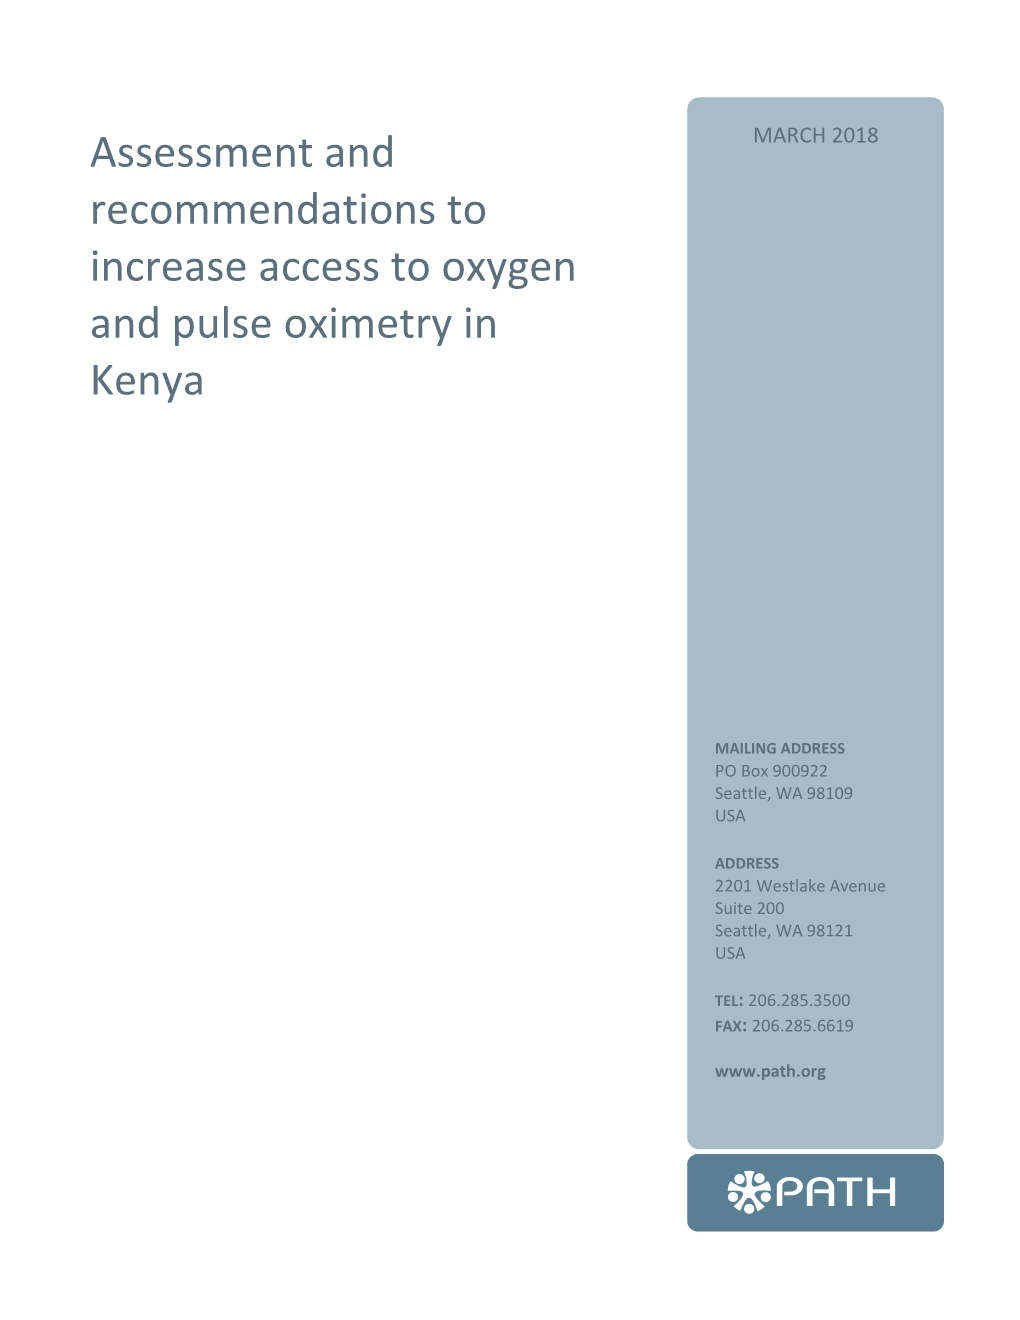 Assessment and Recommendations to Increase Access to Oxygen and Pulse Oximetry in Kenya